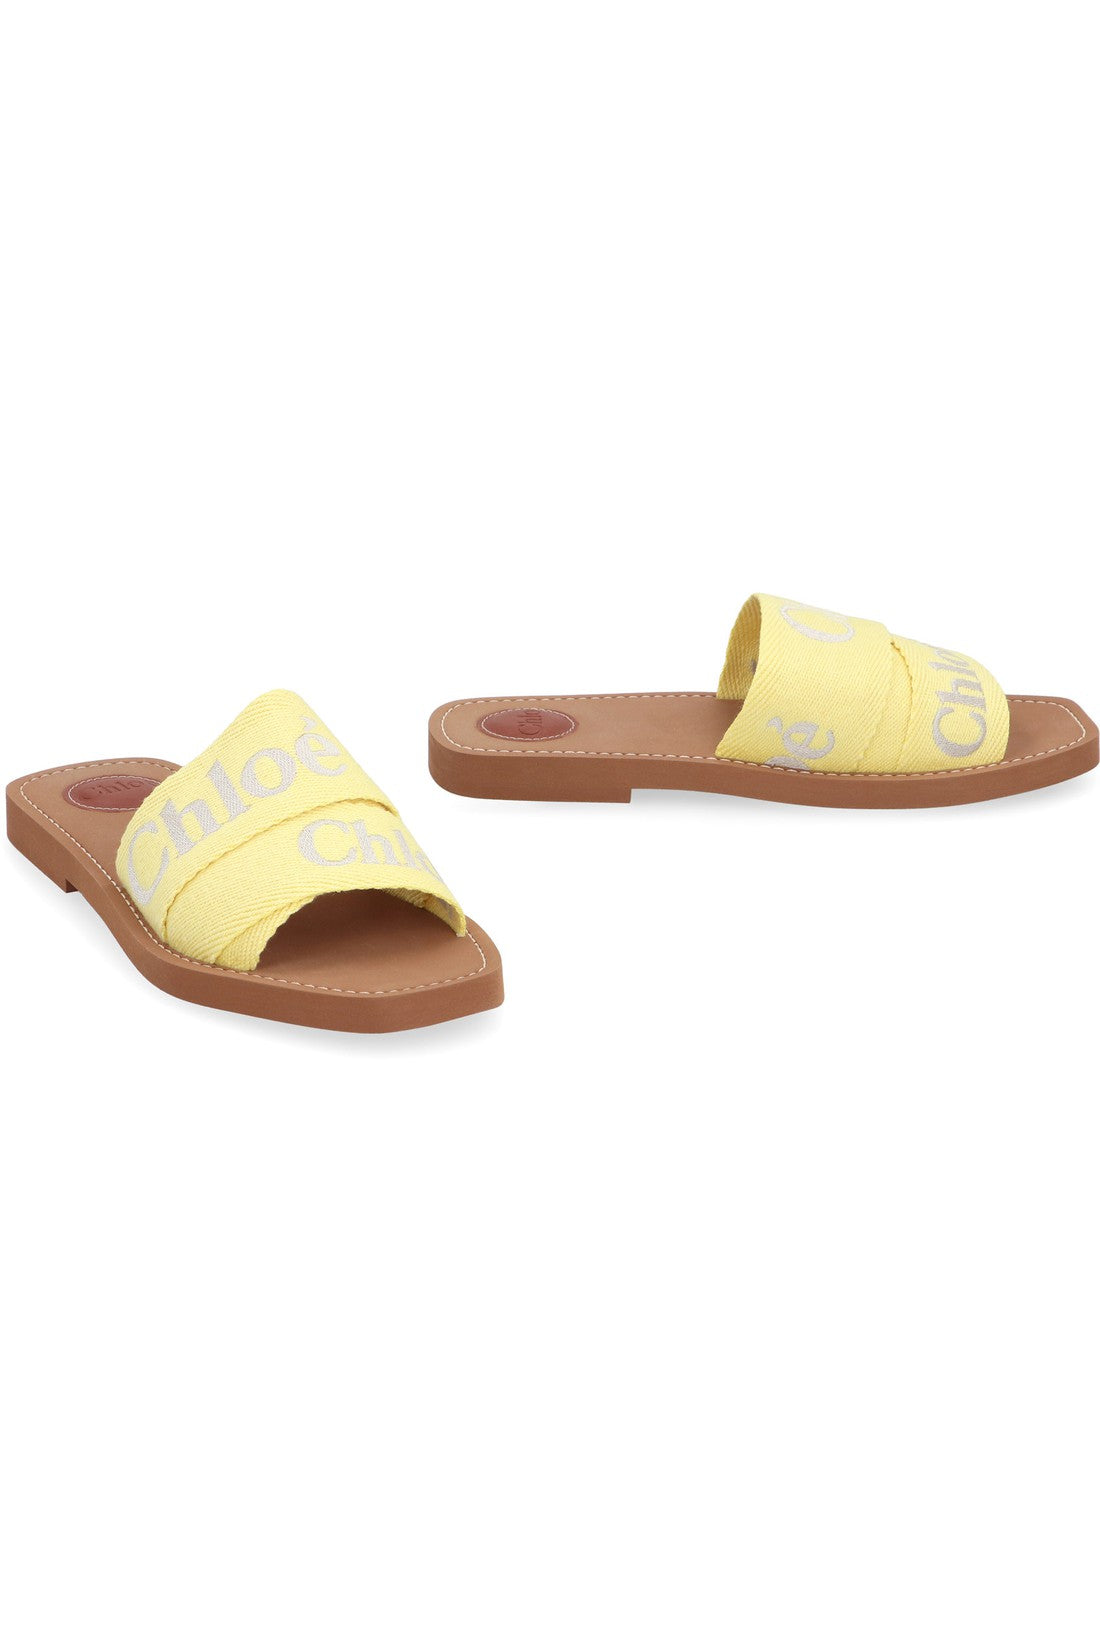 Chloé-OUTLET-SALE-Woody leather and fabric slides-ARCHIVIST